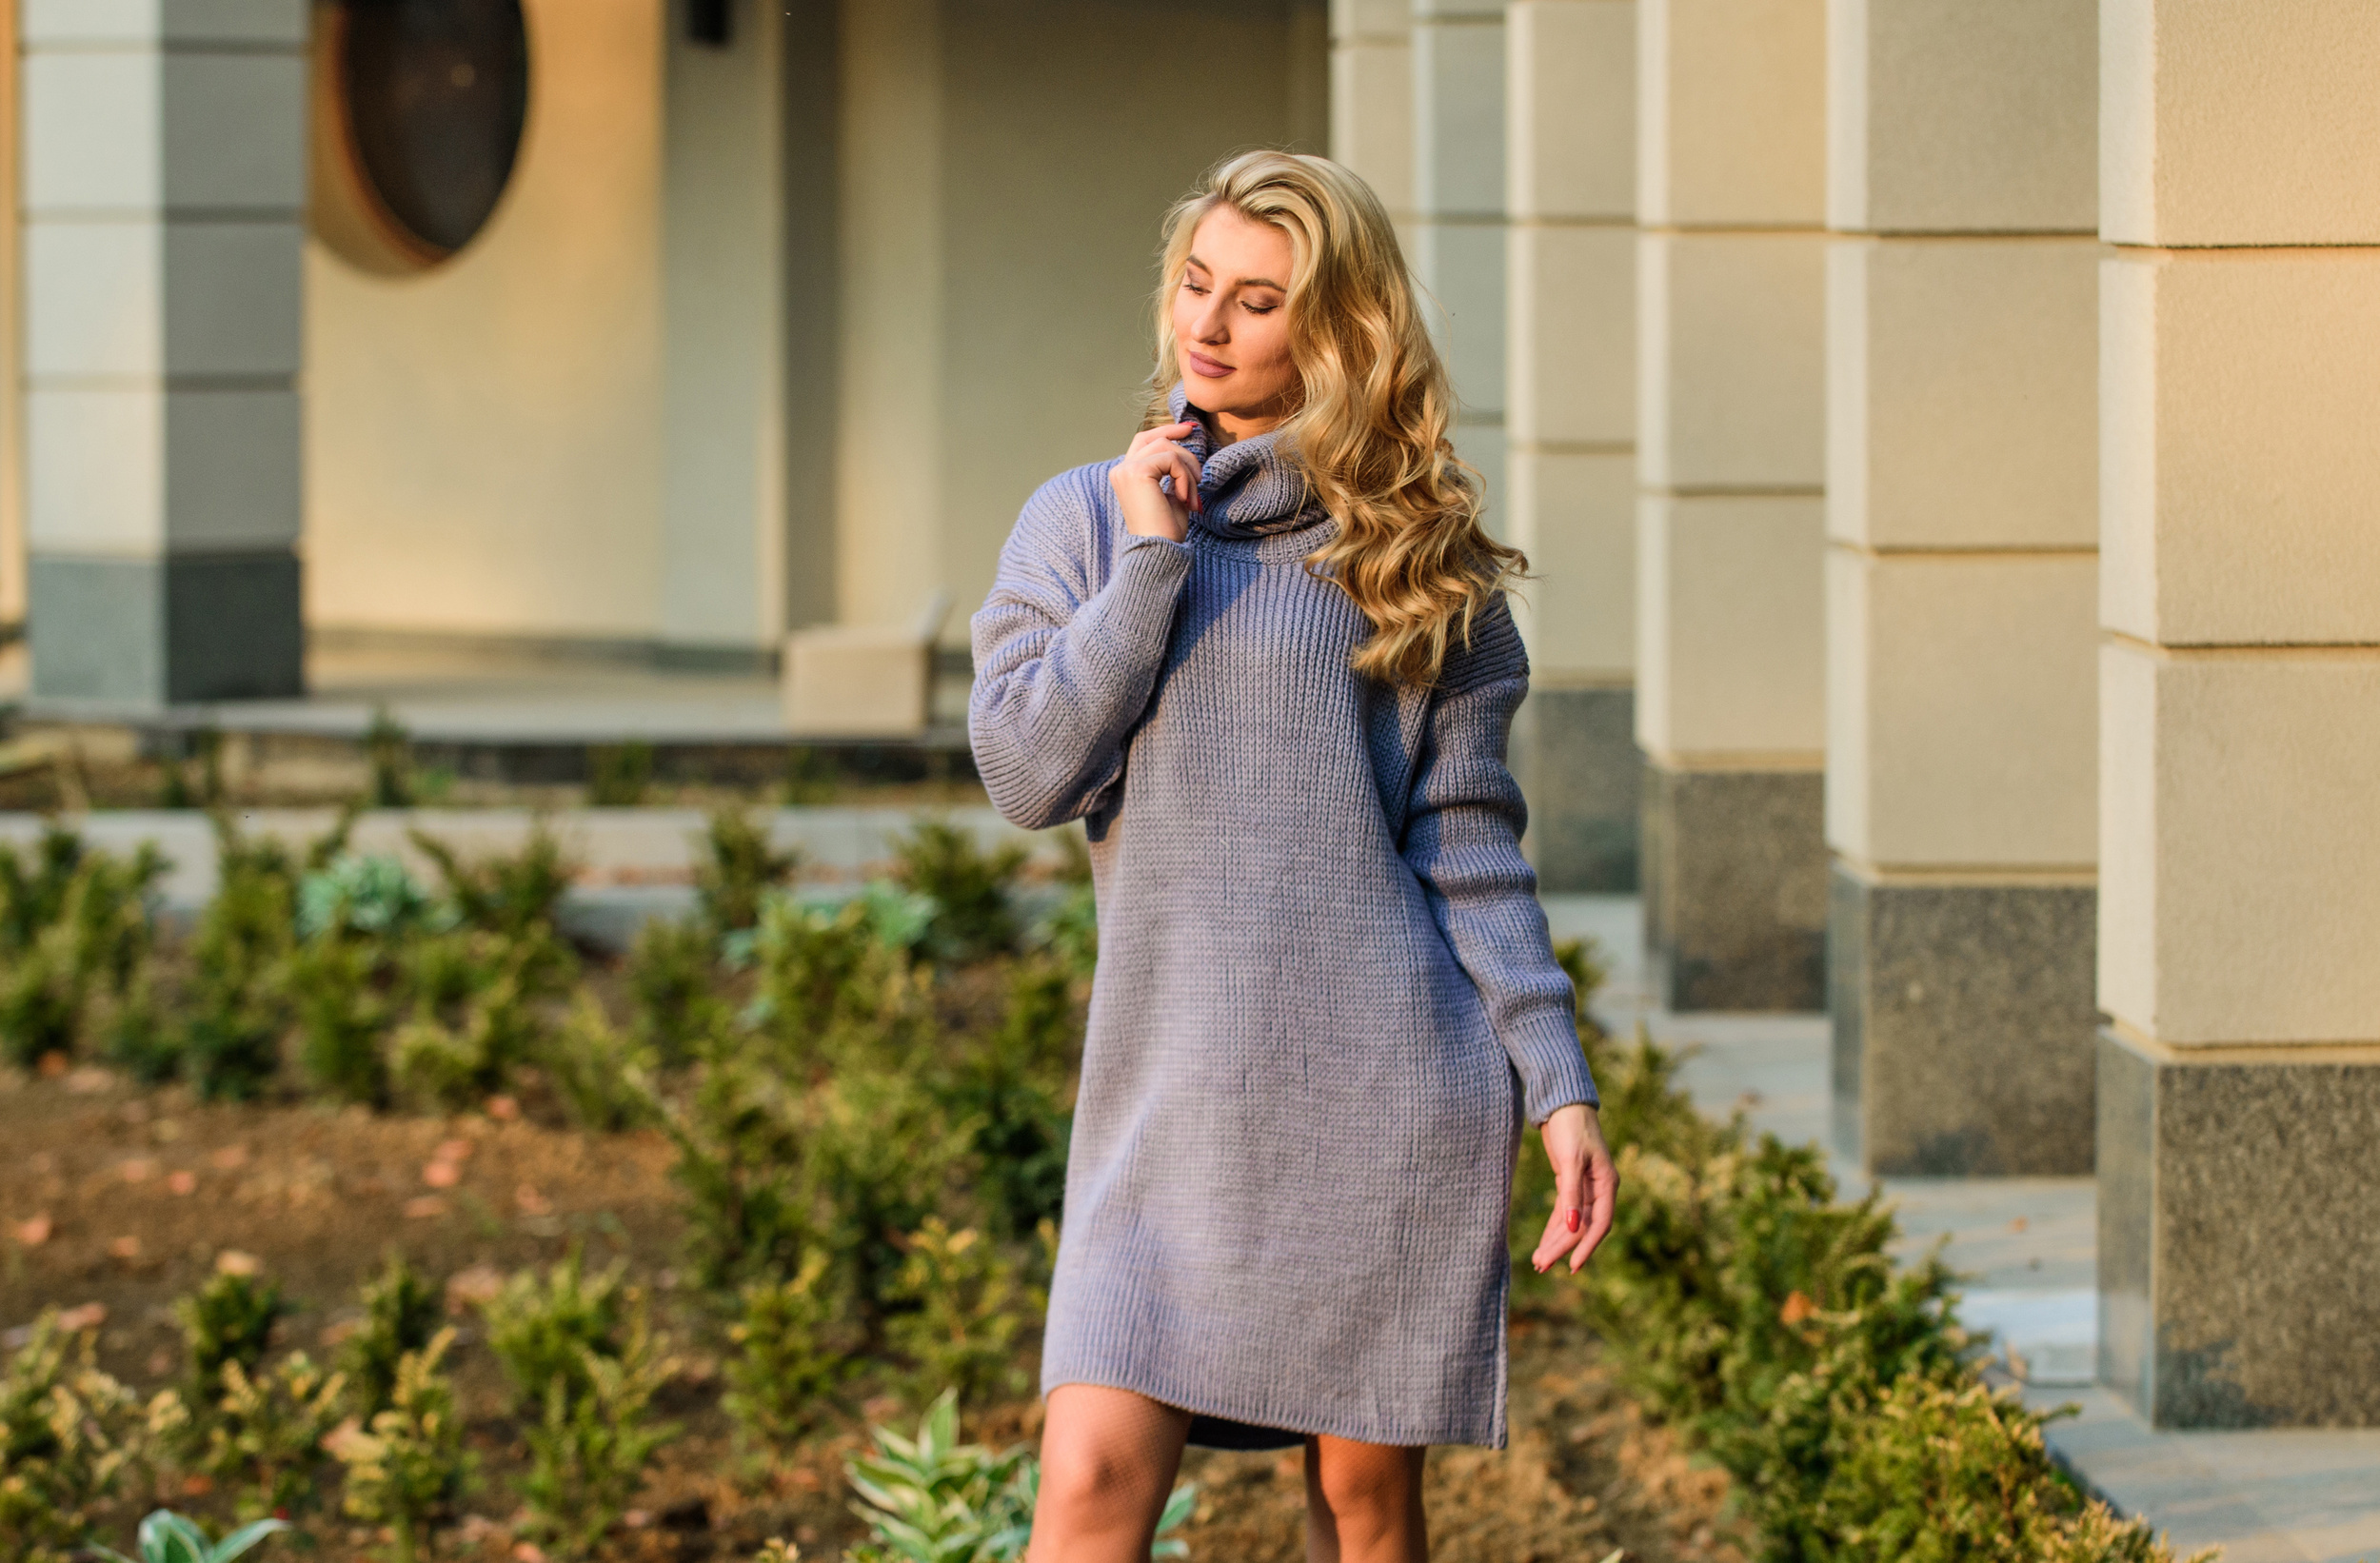 <p>Sweater dresses can be difficult to style, especially as winter comes to an end, but if you want to get a few more wears out of yours, style with spring pieces. Layer one with a trench coat or pair with some open-toed heels. Try wearing a sweater dress with sneakers or with boots and no coat. </p><p><a href='https://www.msn.com/en-us/community/channel/vid-cj9pqbr0vn9in2b6ddcd8sfgpfq6x6utp44fssrv6mc2gtybw0us'>Follow us on MSN to see more of our exclusive lifestyle content.</a></p>